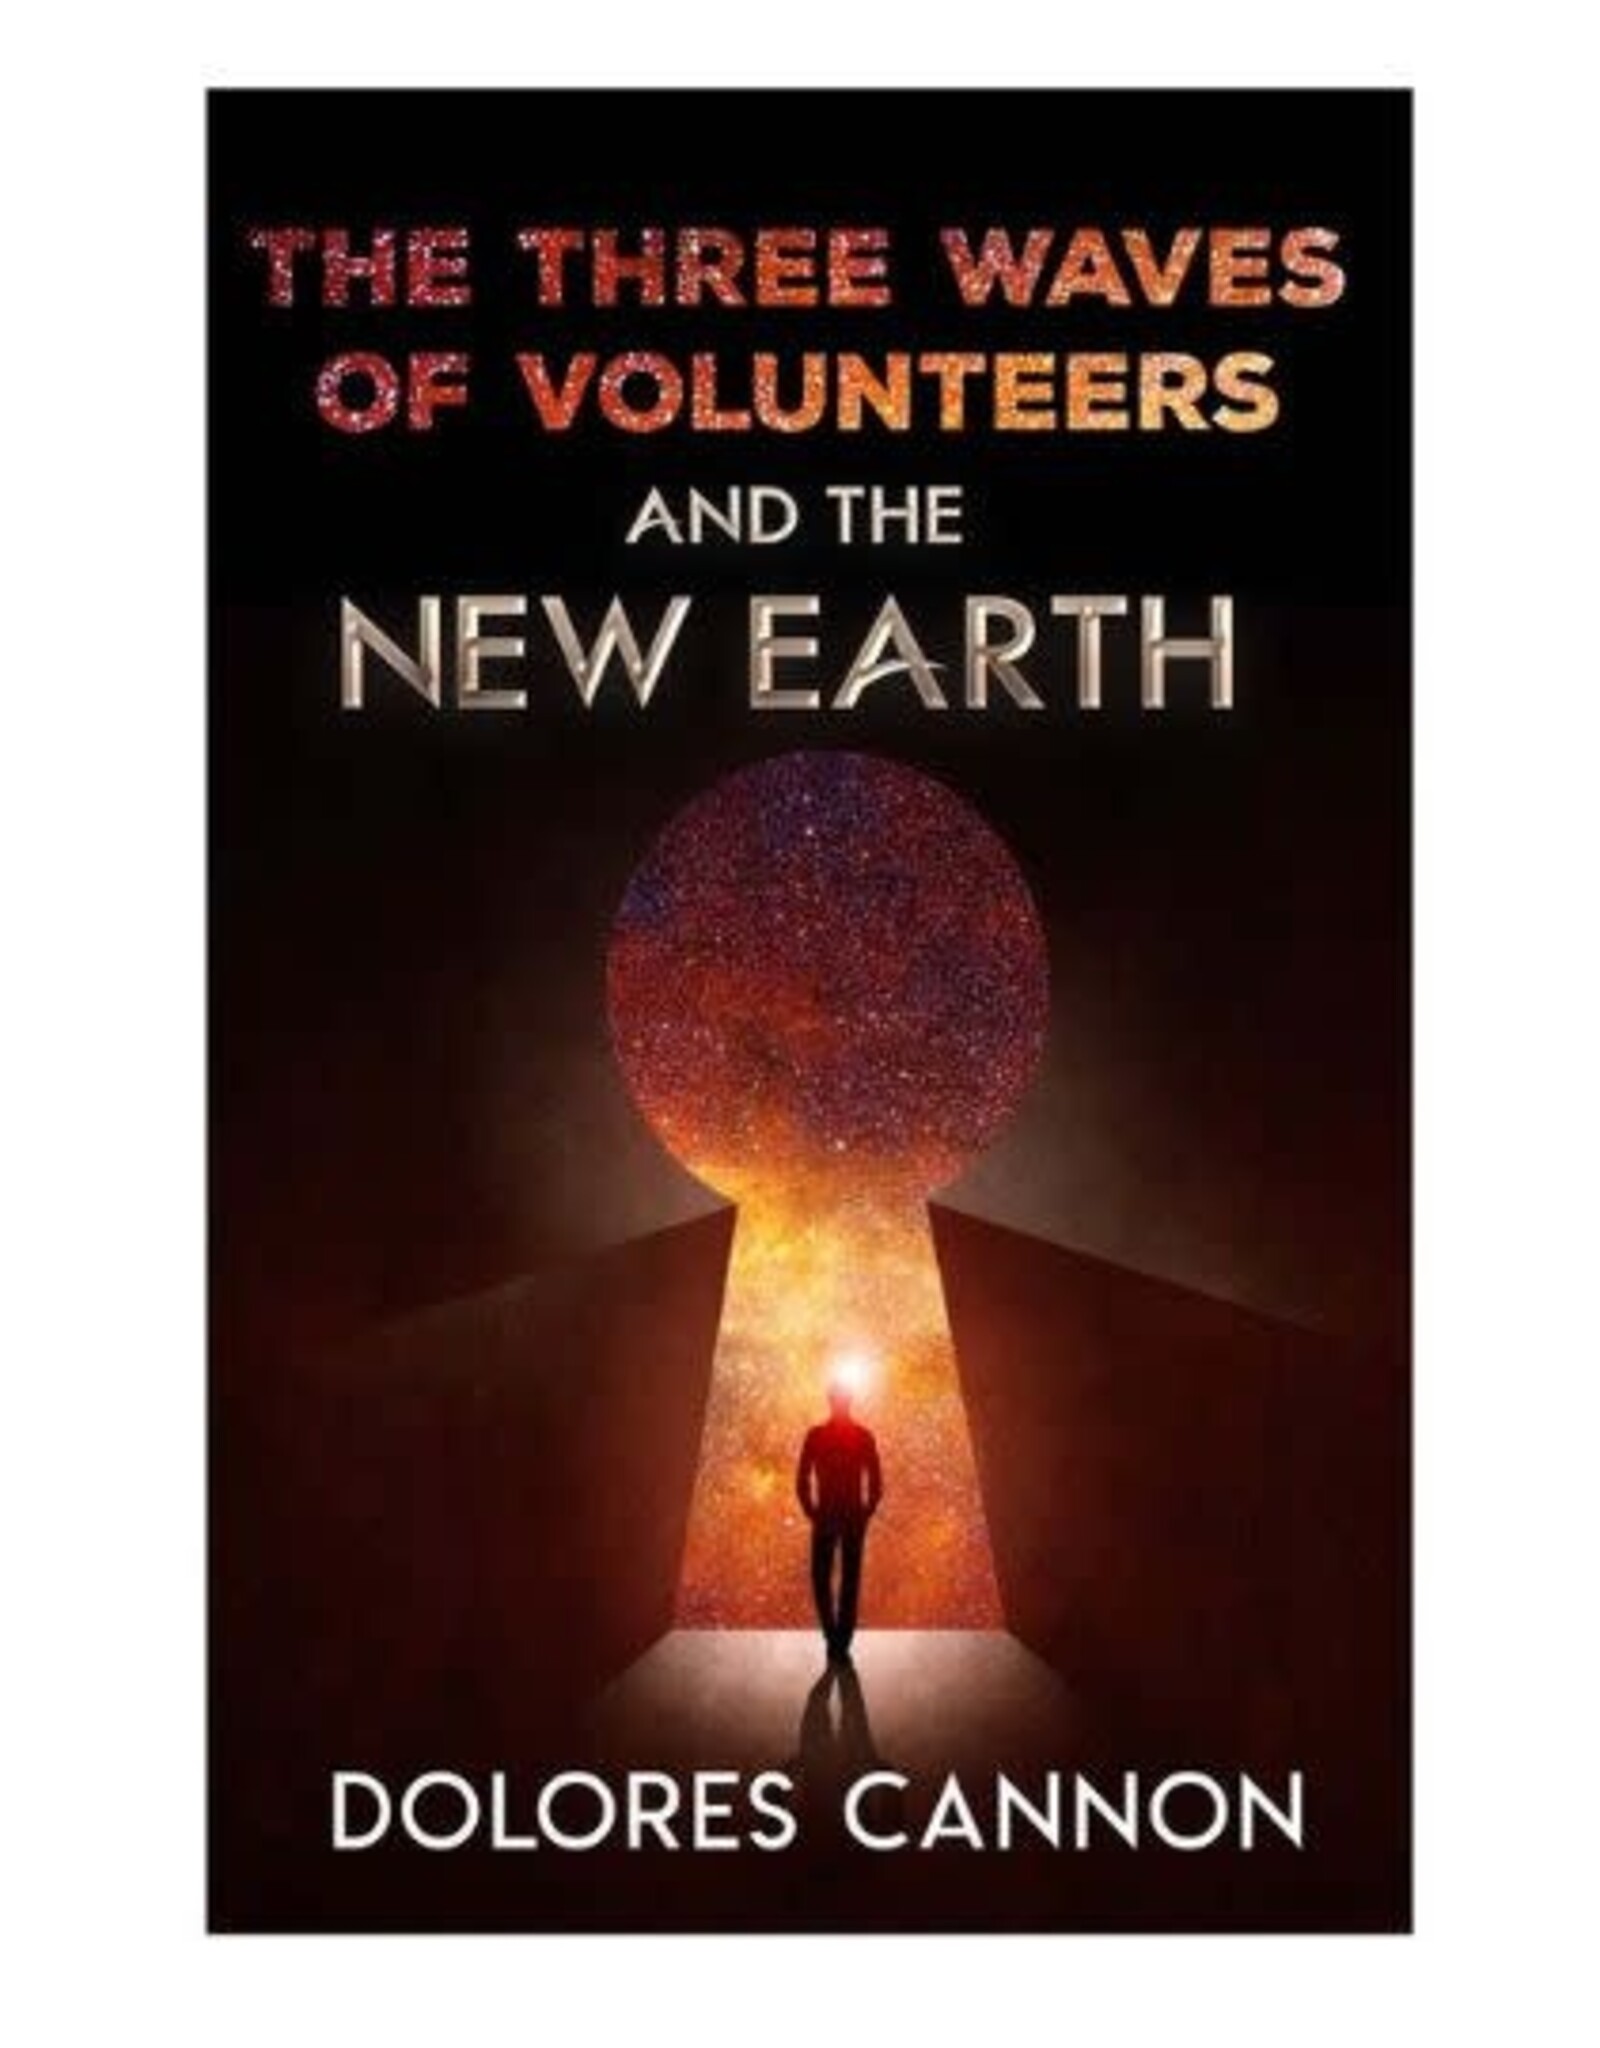 Three Waves of Volunteers and the New Earth by Dolores Cannon